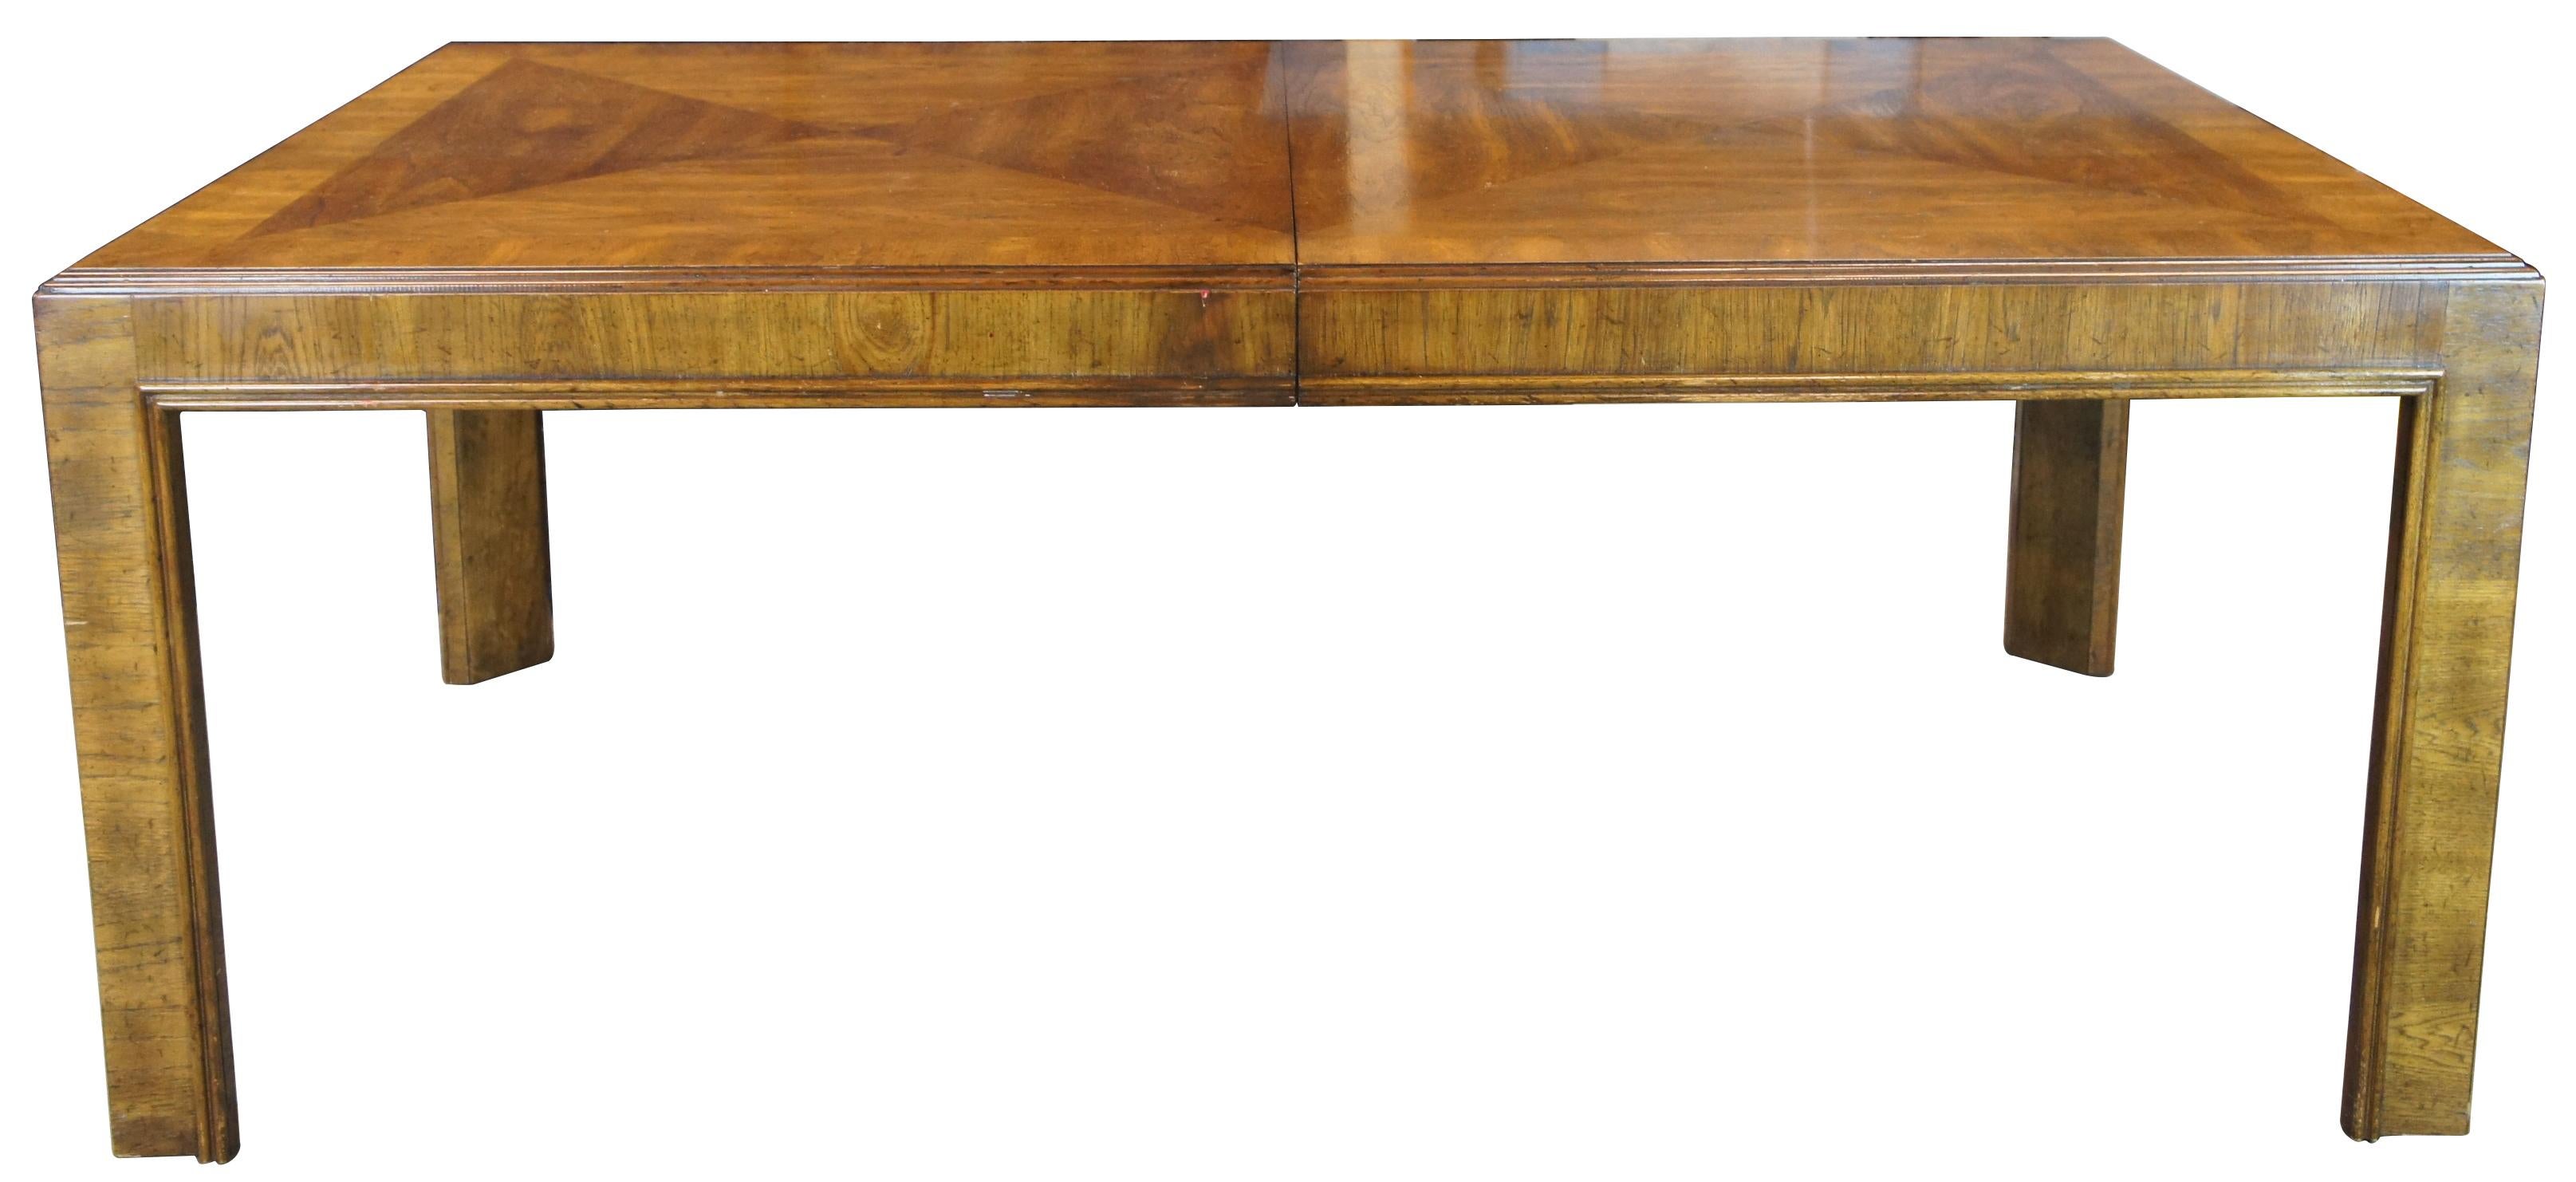 Vintage Drexel Heritage mid century modern parsons style extendable dining table. Made of walnut featuring rectangular form with matchbook top and three large extendable leaves. 955-344-34 - 475.

Measures: 45